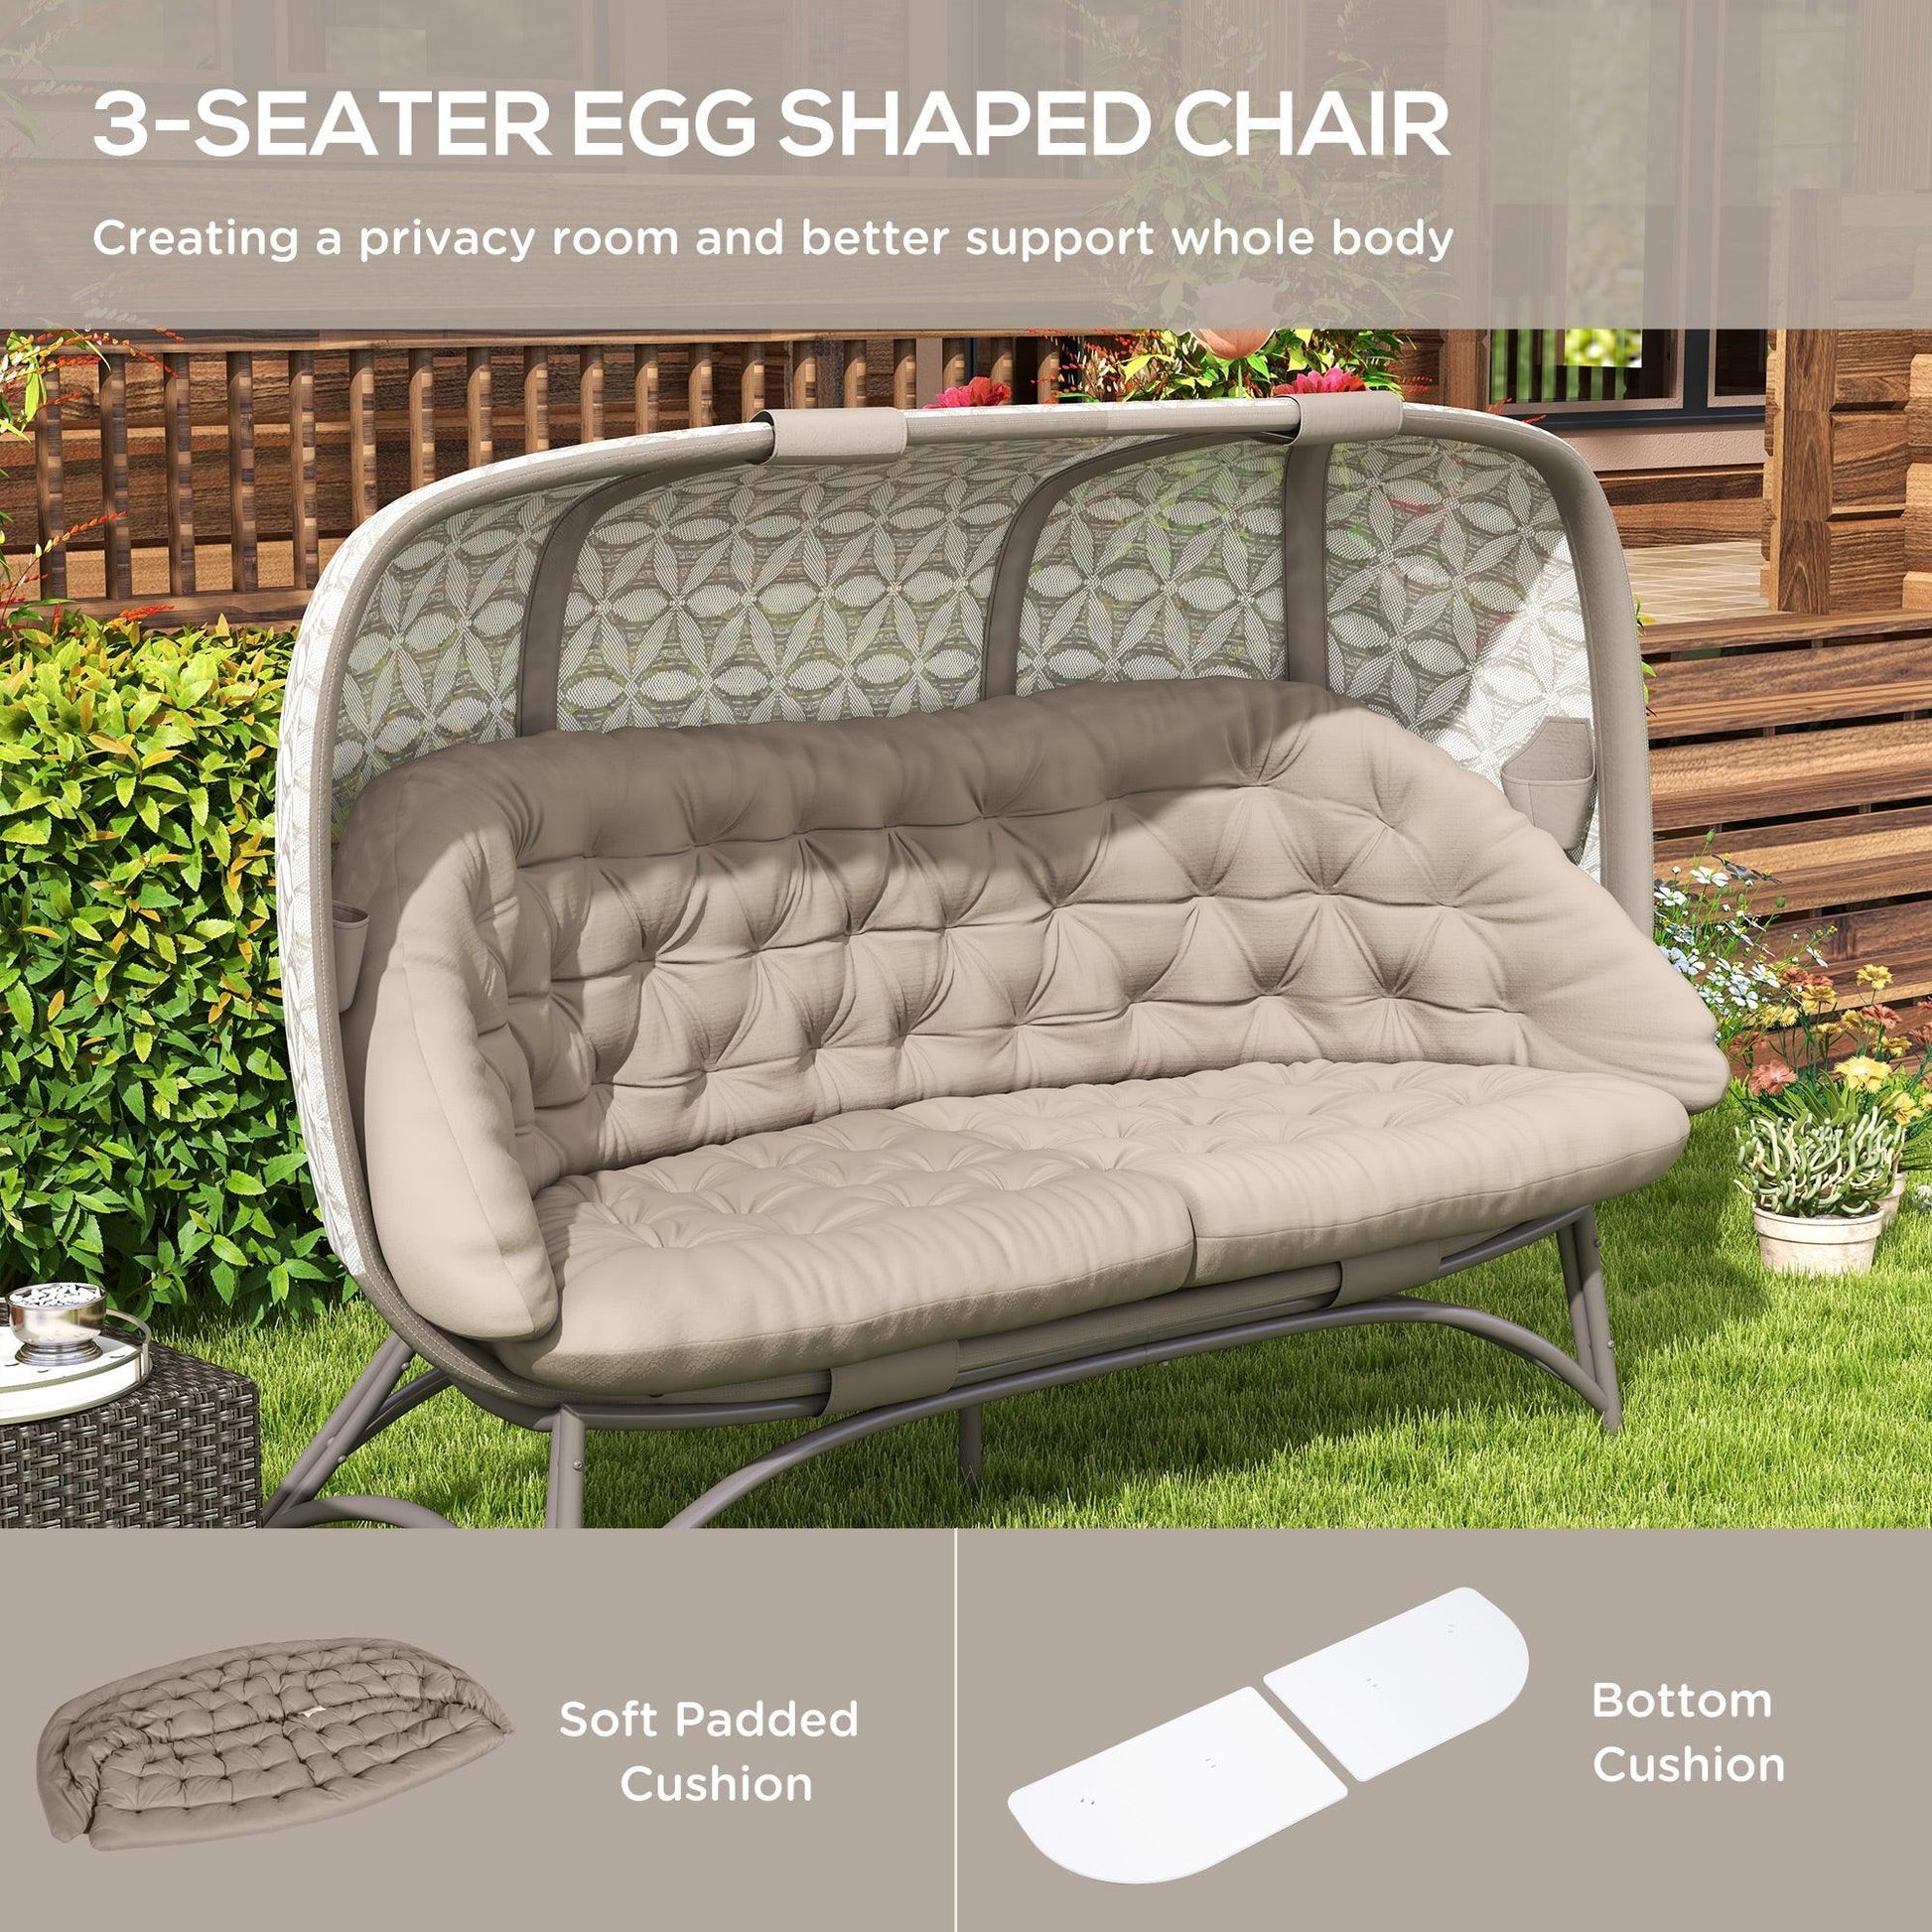 Outsunny Outdoor Egg Chair, Sand Brown, Flower Pattern - ALL4U RETAILER LTD